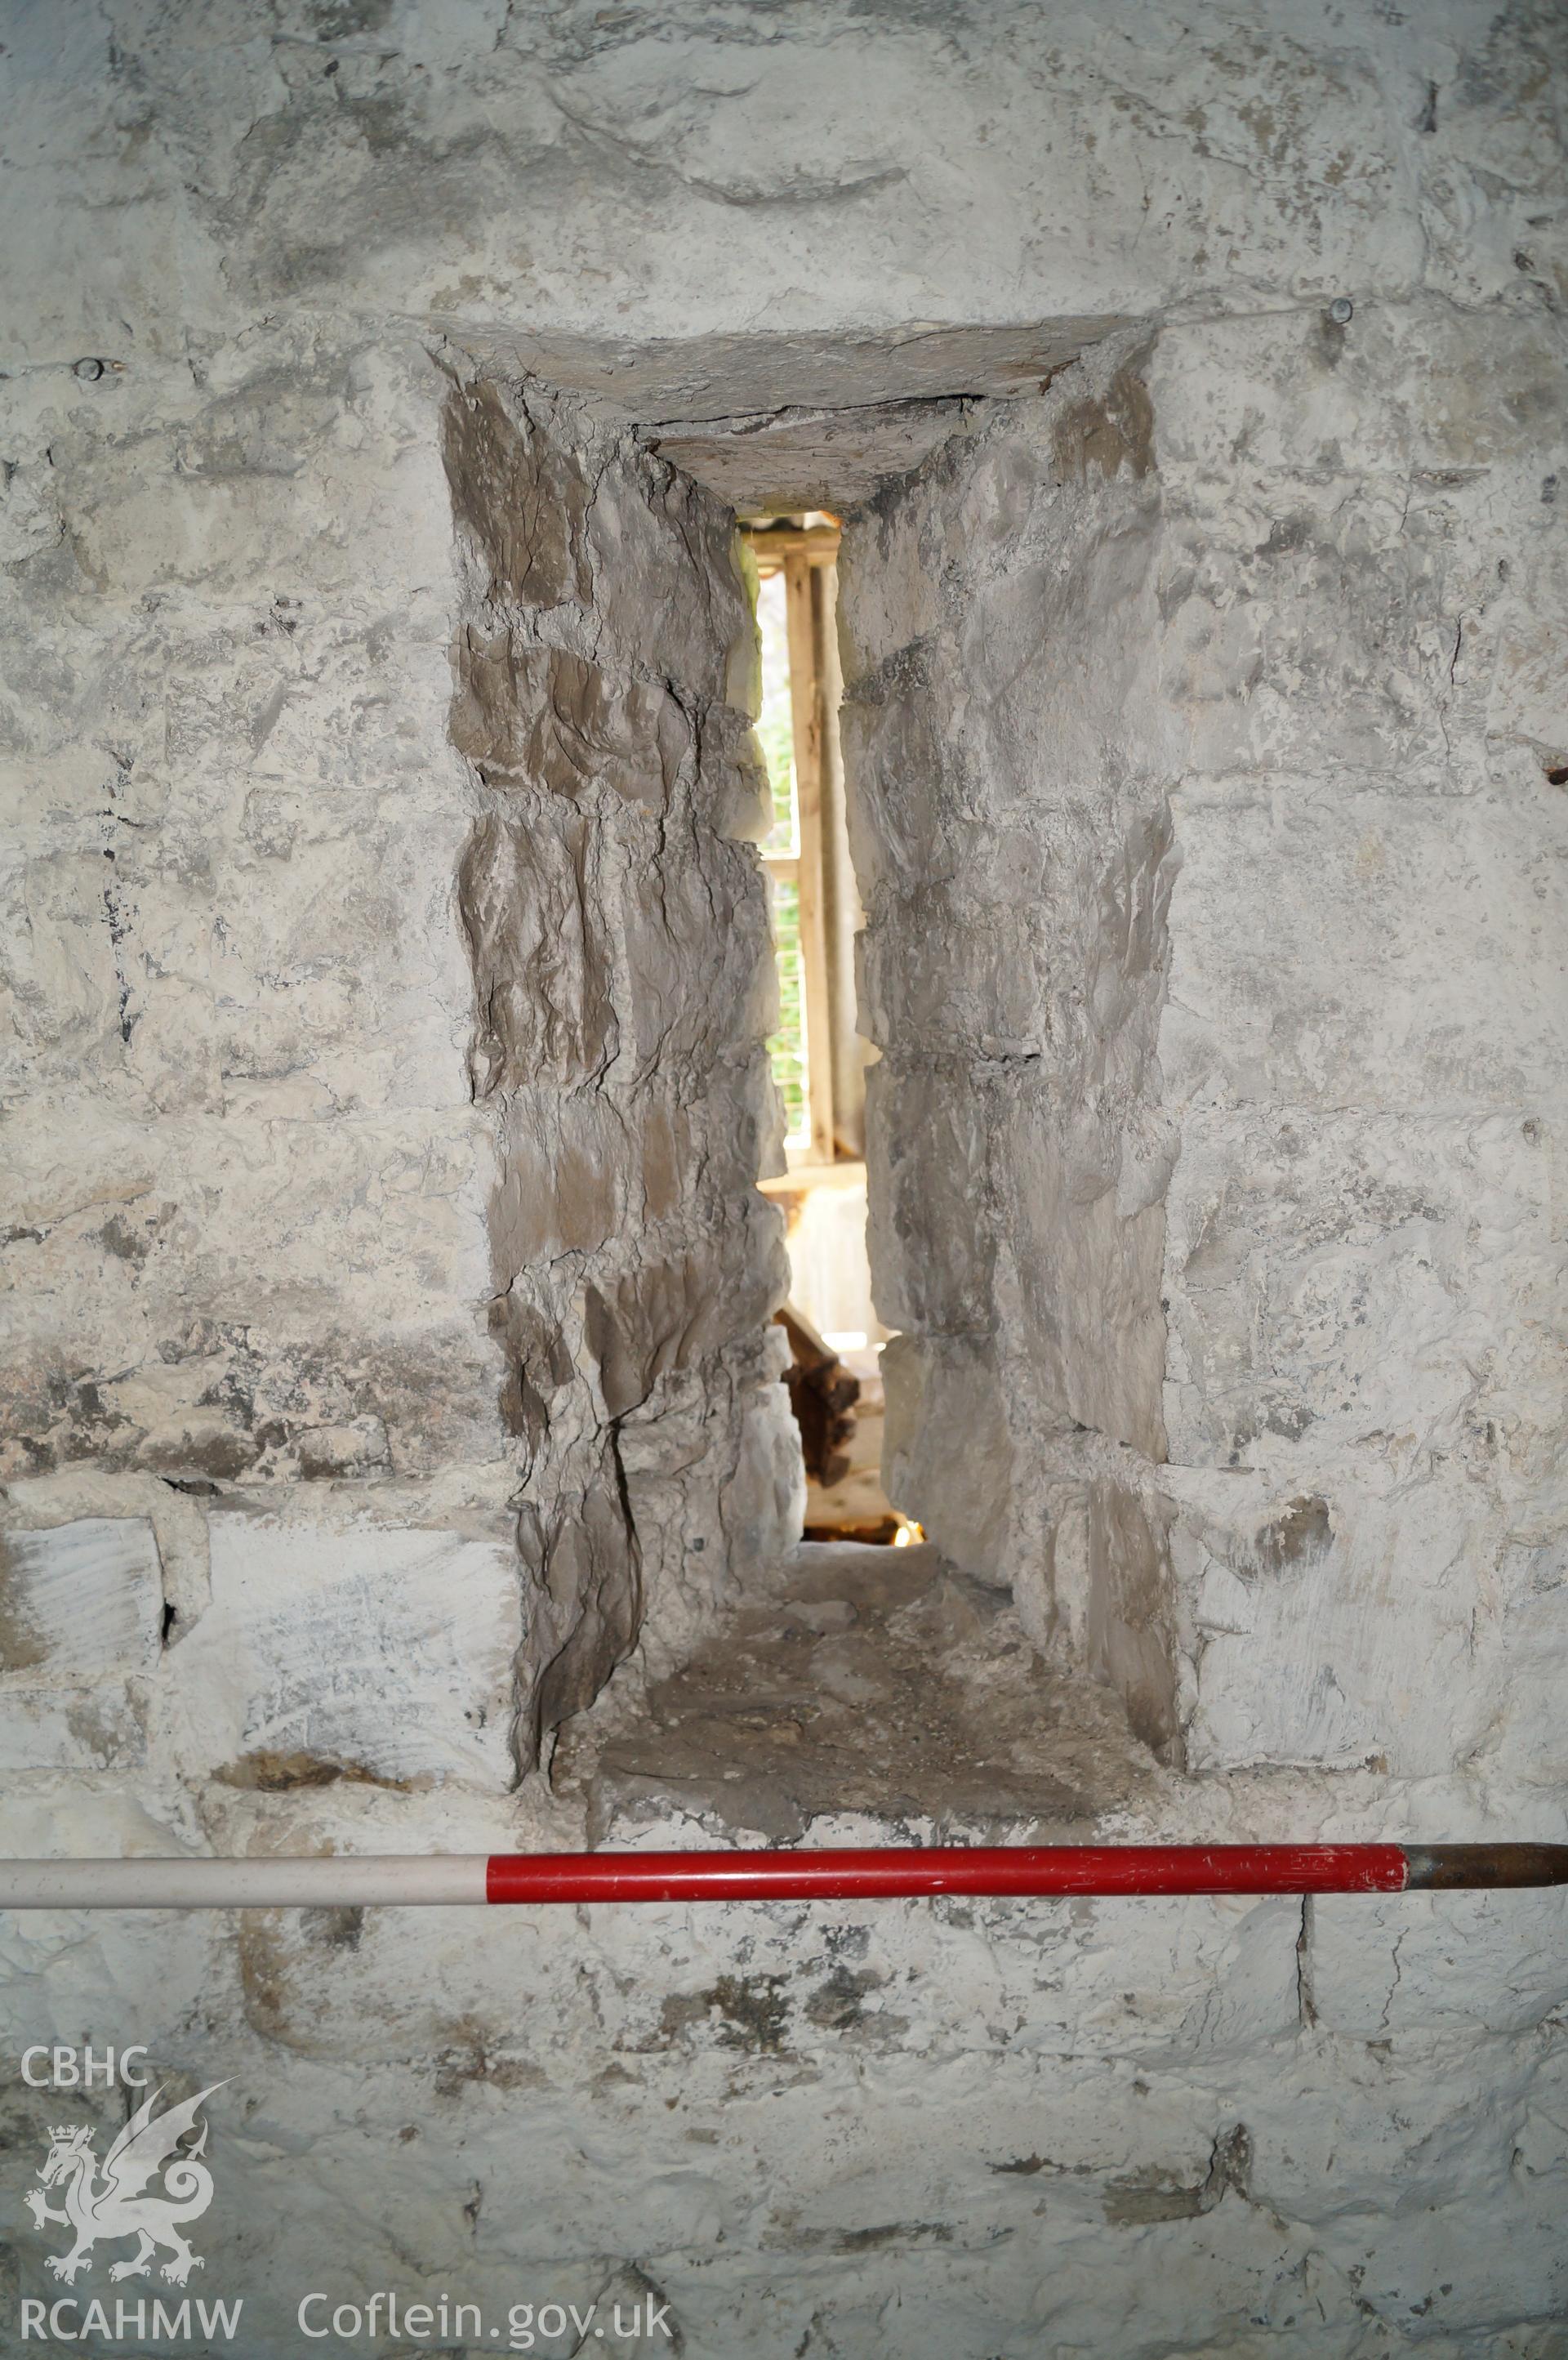 'Internal view looking south southeast at the ventilation slit in the southern wall of barn' at Rowley Court, Llantwit Major. Photograph & description by Jenny Hall & Paul Sambrook of Trysor, 25th May 2017.